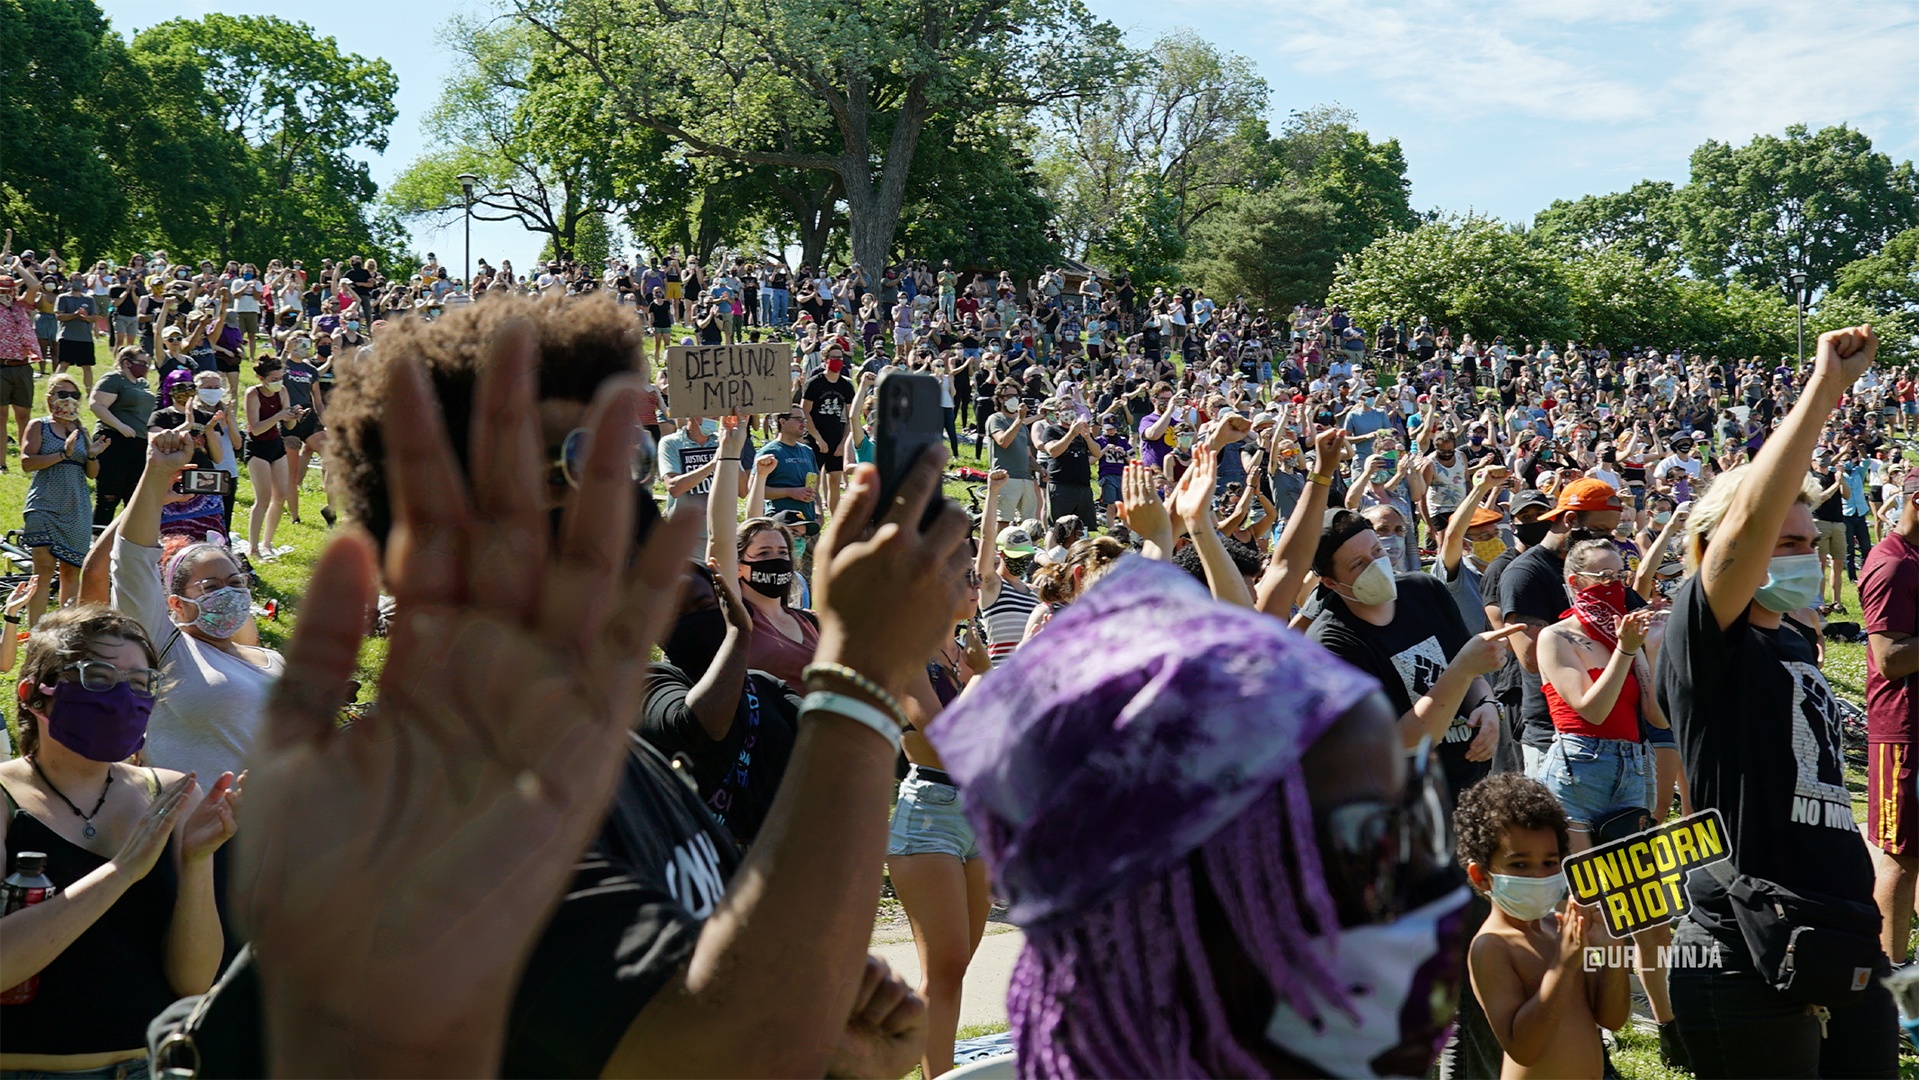 image: the hill of protesters reacts positively to the notion of defunding & disbanding the Minneapolis police department. In the foreground one person's left hand is upraised with their fingers outstretched and their palm towards the stage.